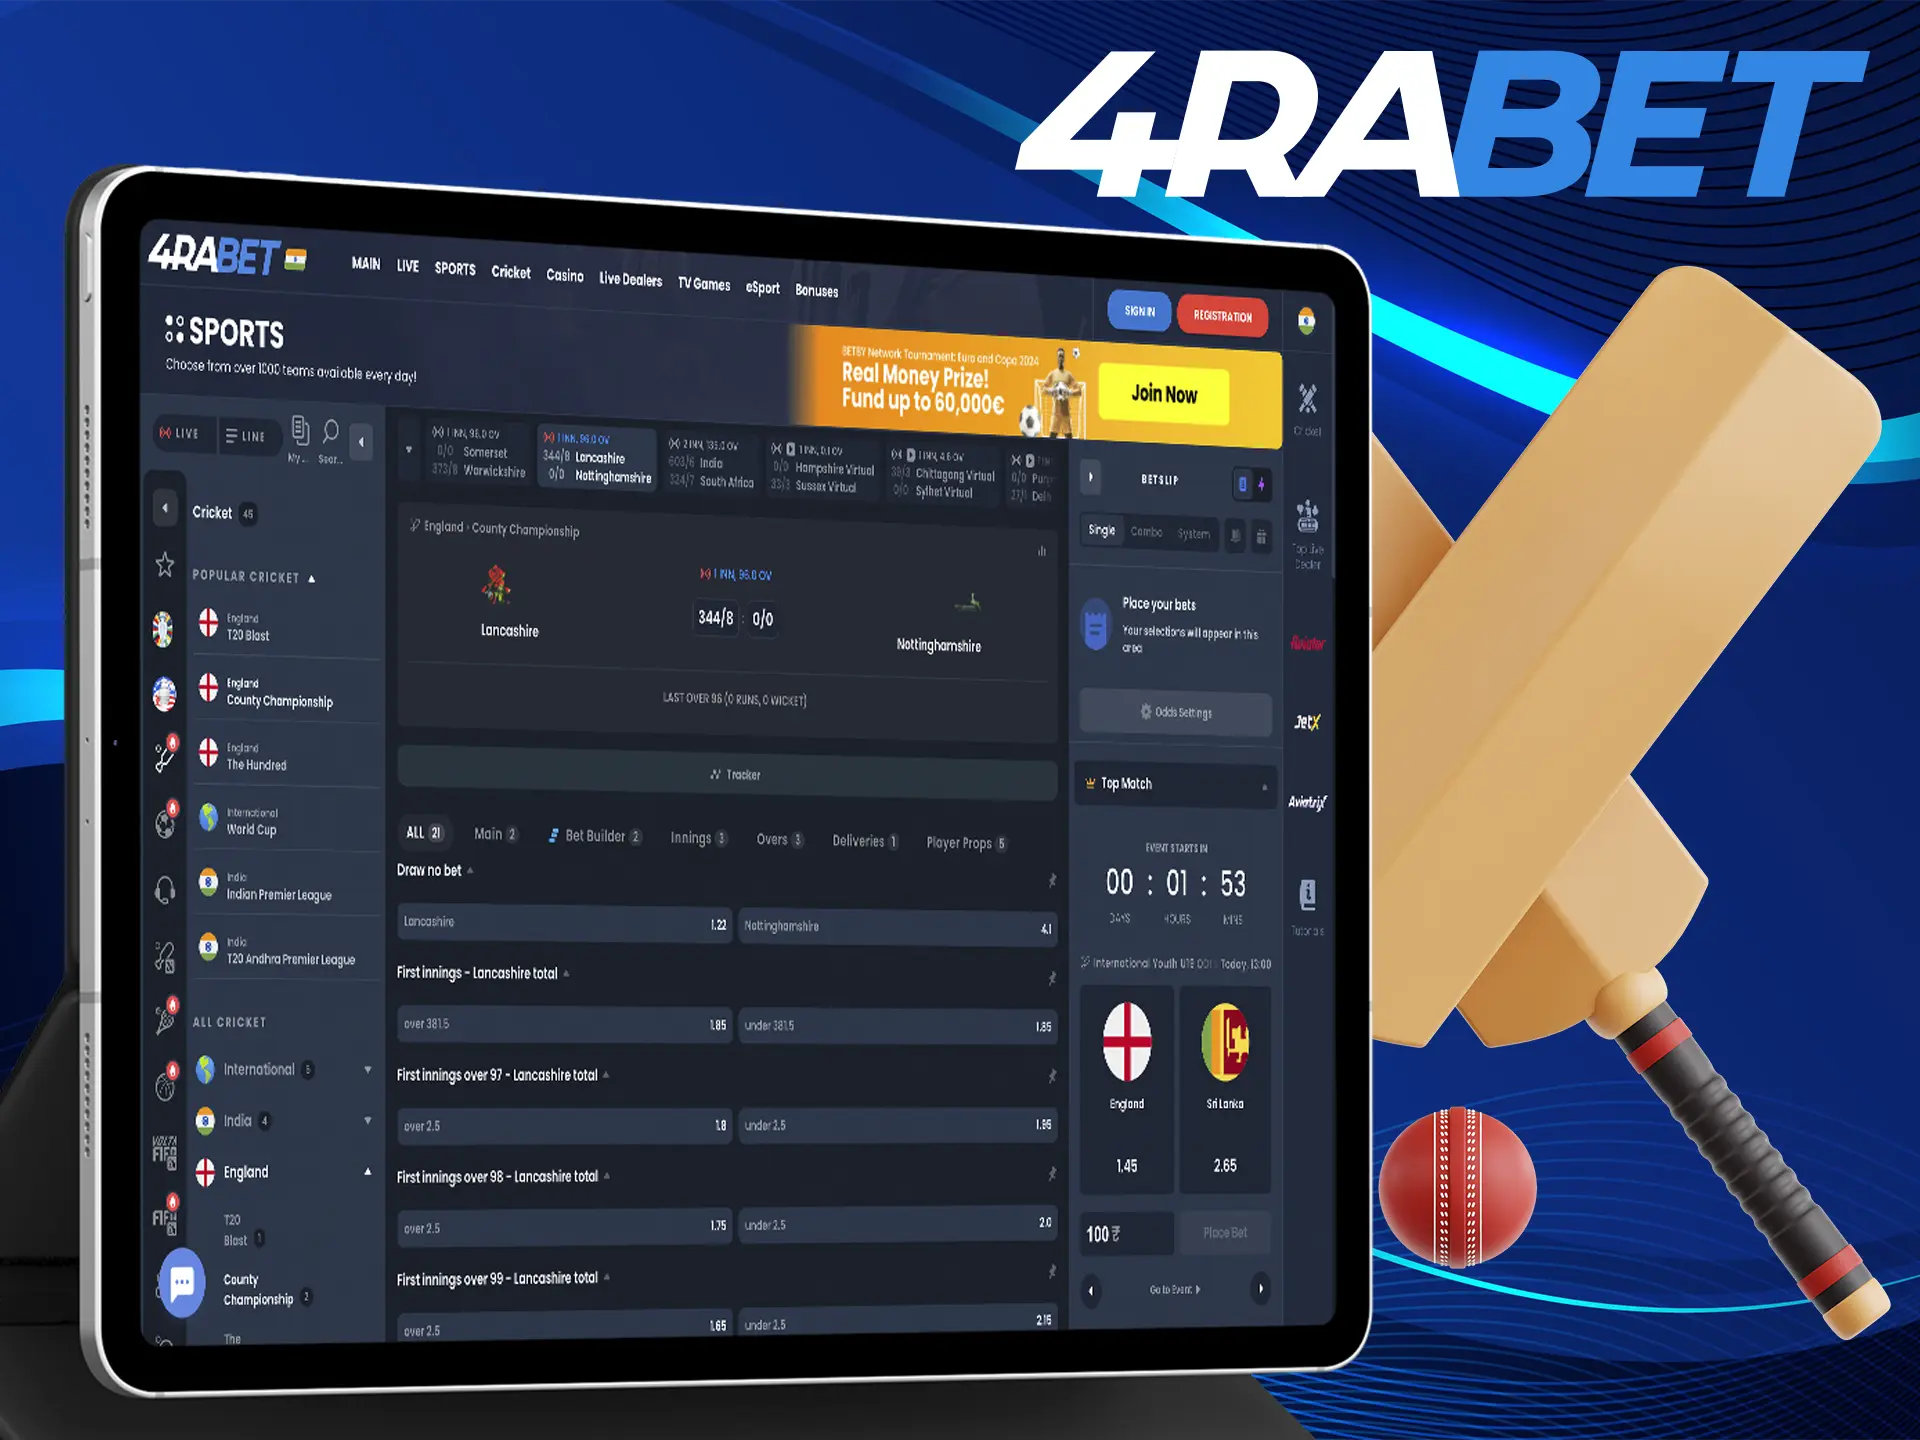 Users prefer to bet at 4rabet because it is a bookmaker with some of the highest odds.